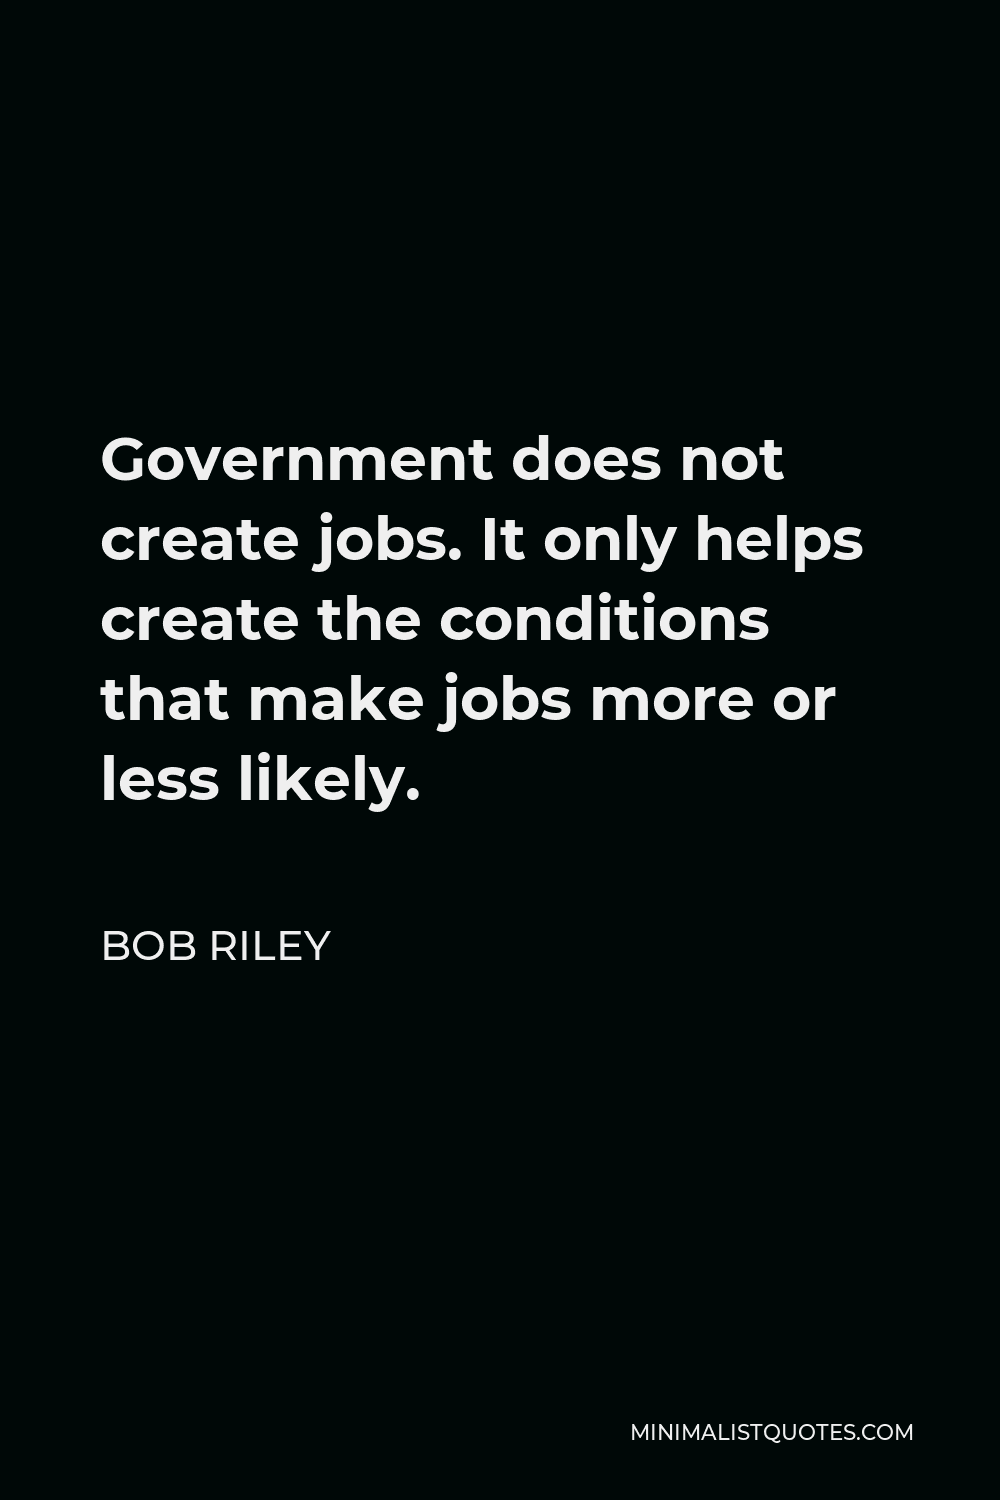 Bob Riley Quote - Government does not create jobs. It only helps create the conditions that make jobs more or less likely.